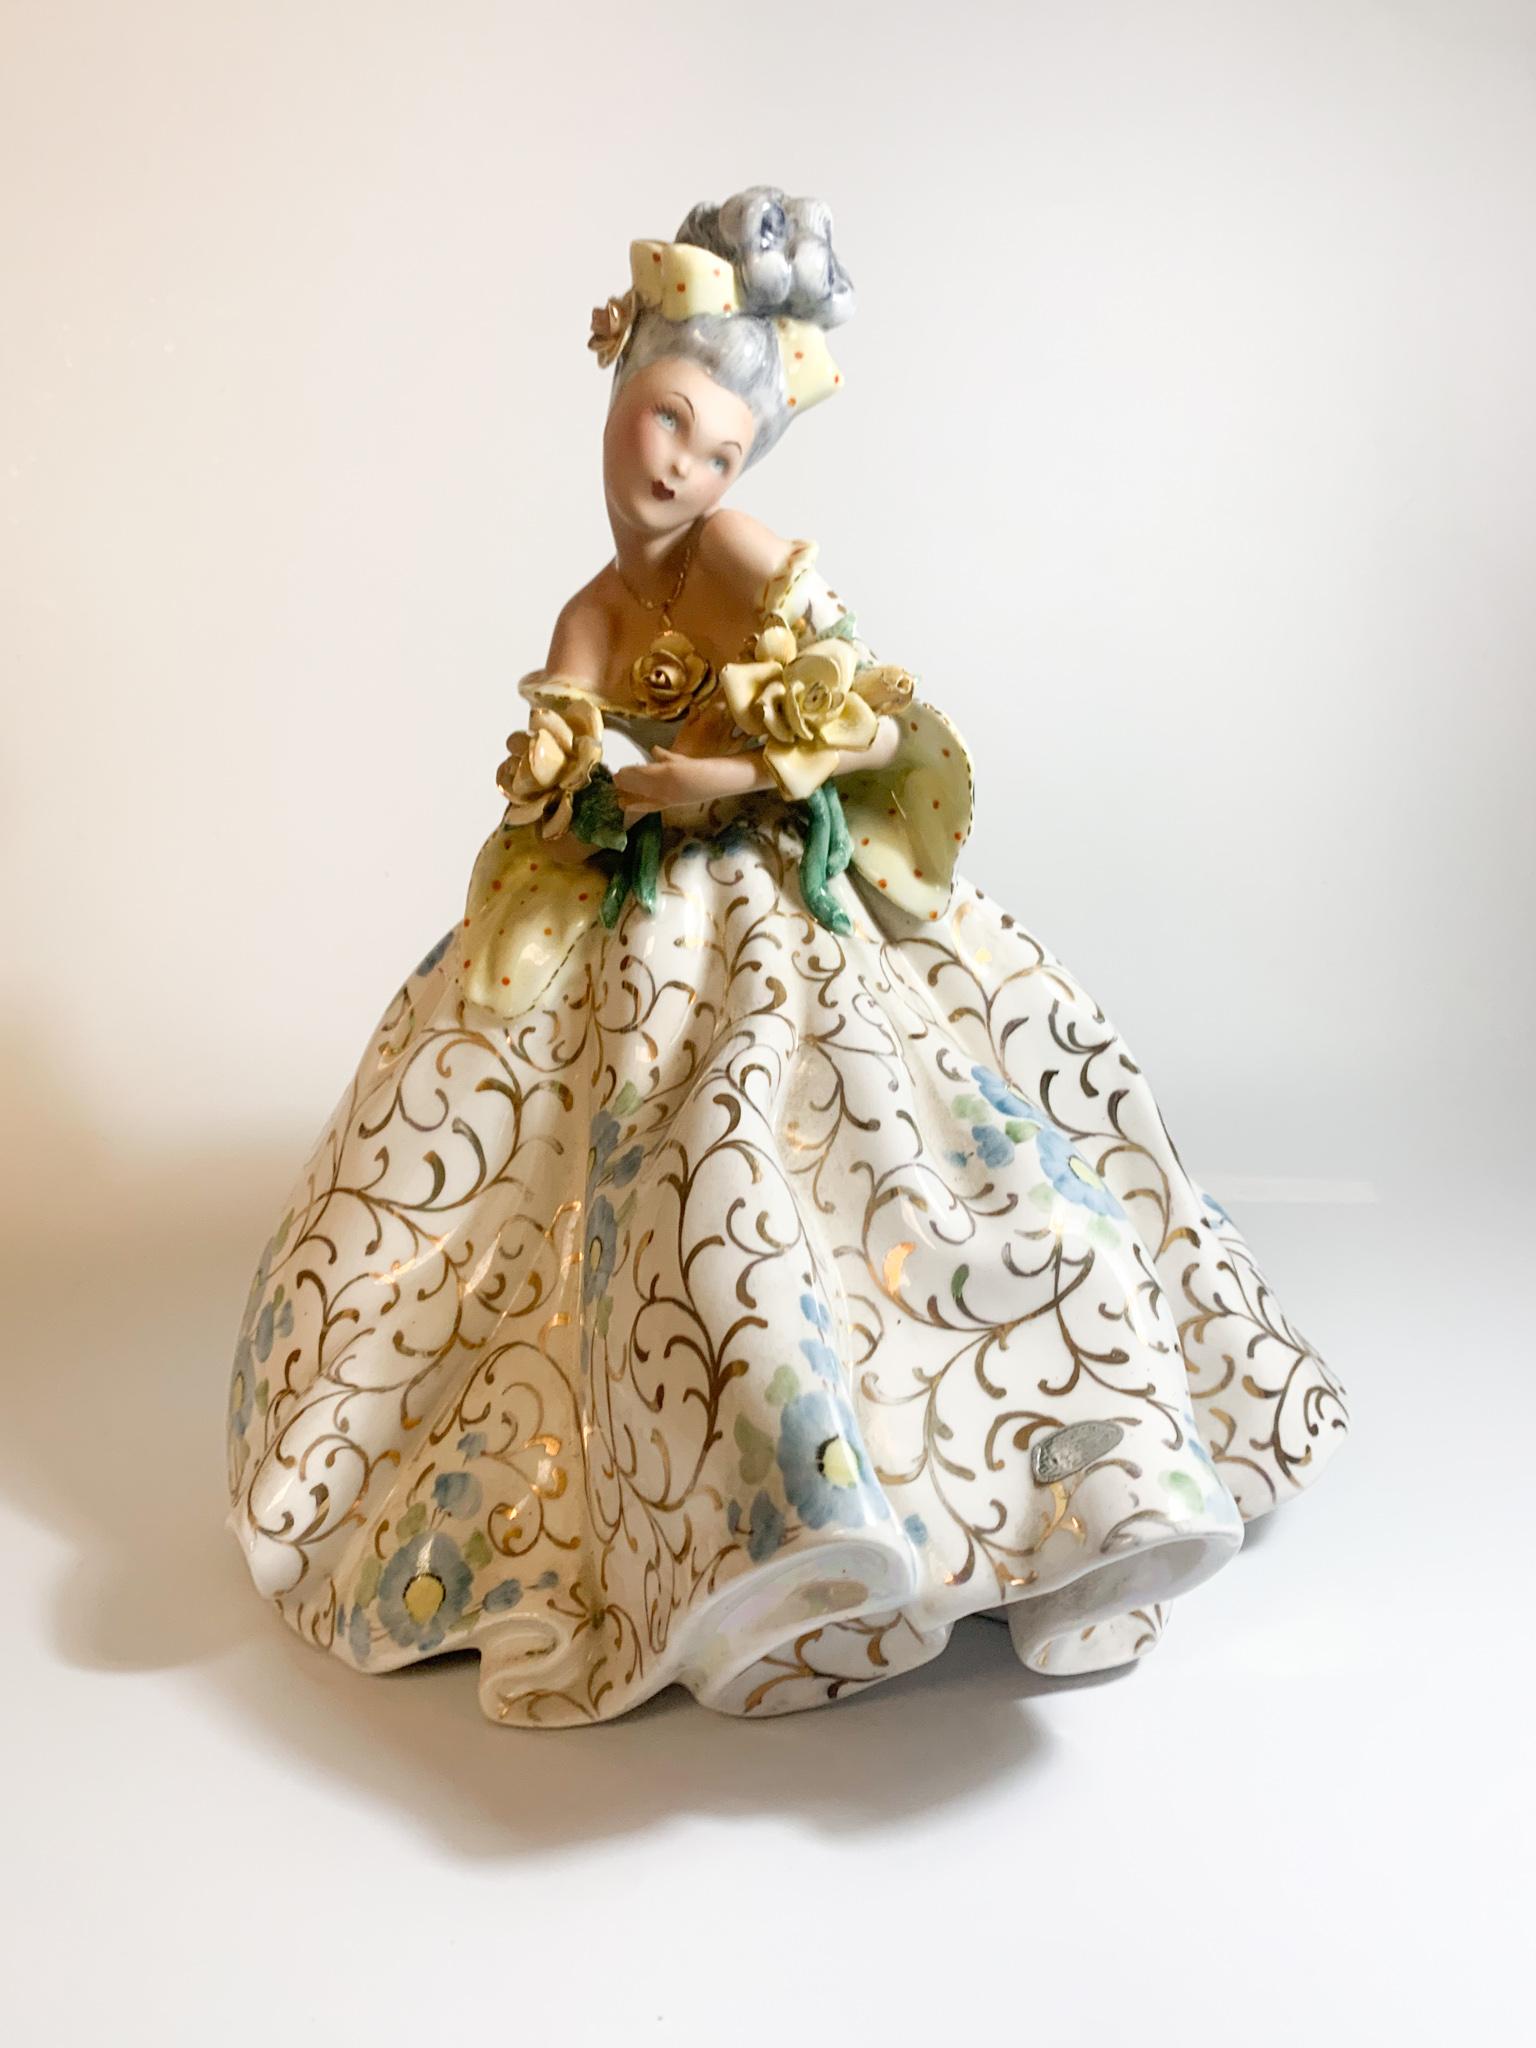 Ceramic Statue of a Lady with Iridescent Details by Tiziano Galli from the 1950s For Sale 5